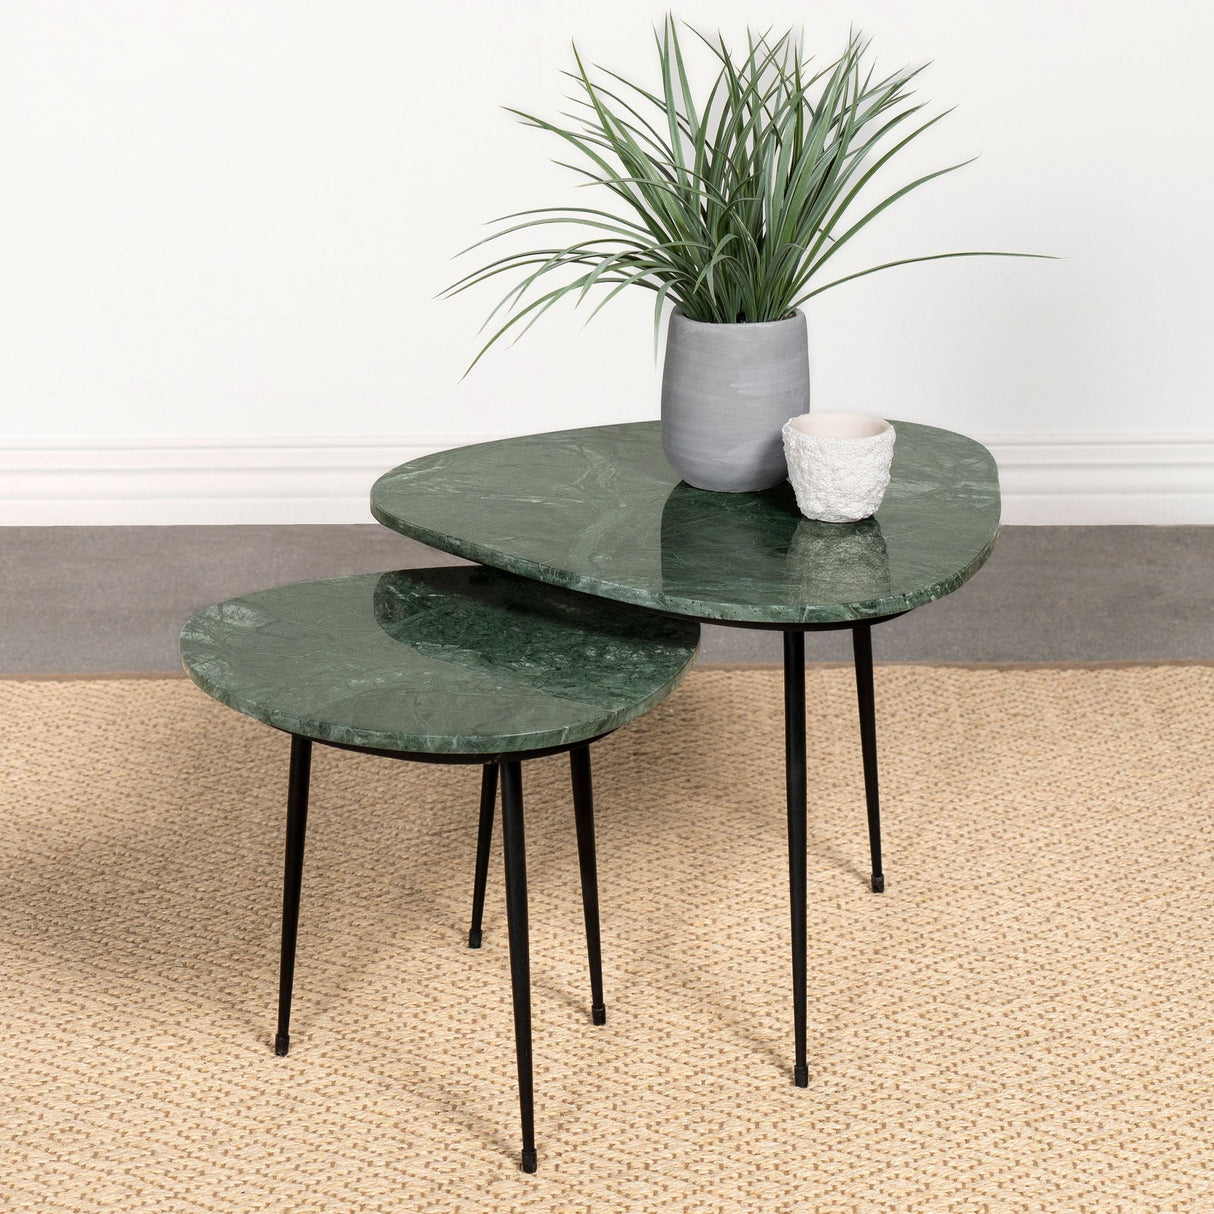 2 Pc Nesting Table - Tobias 2-piece Triangular Marble Top Nesting Table Green and Black